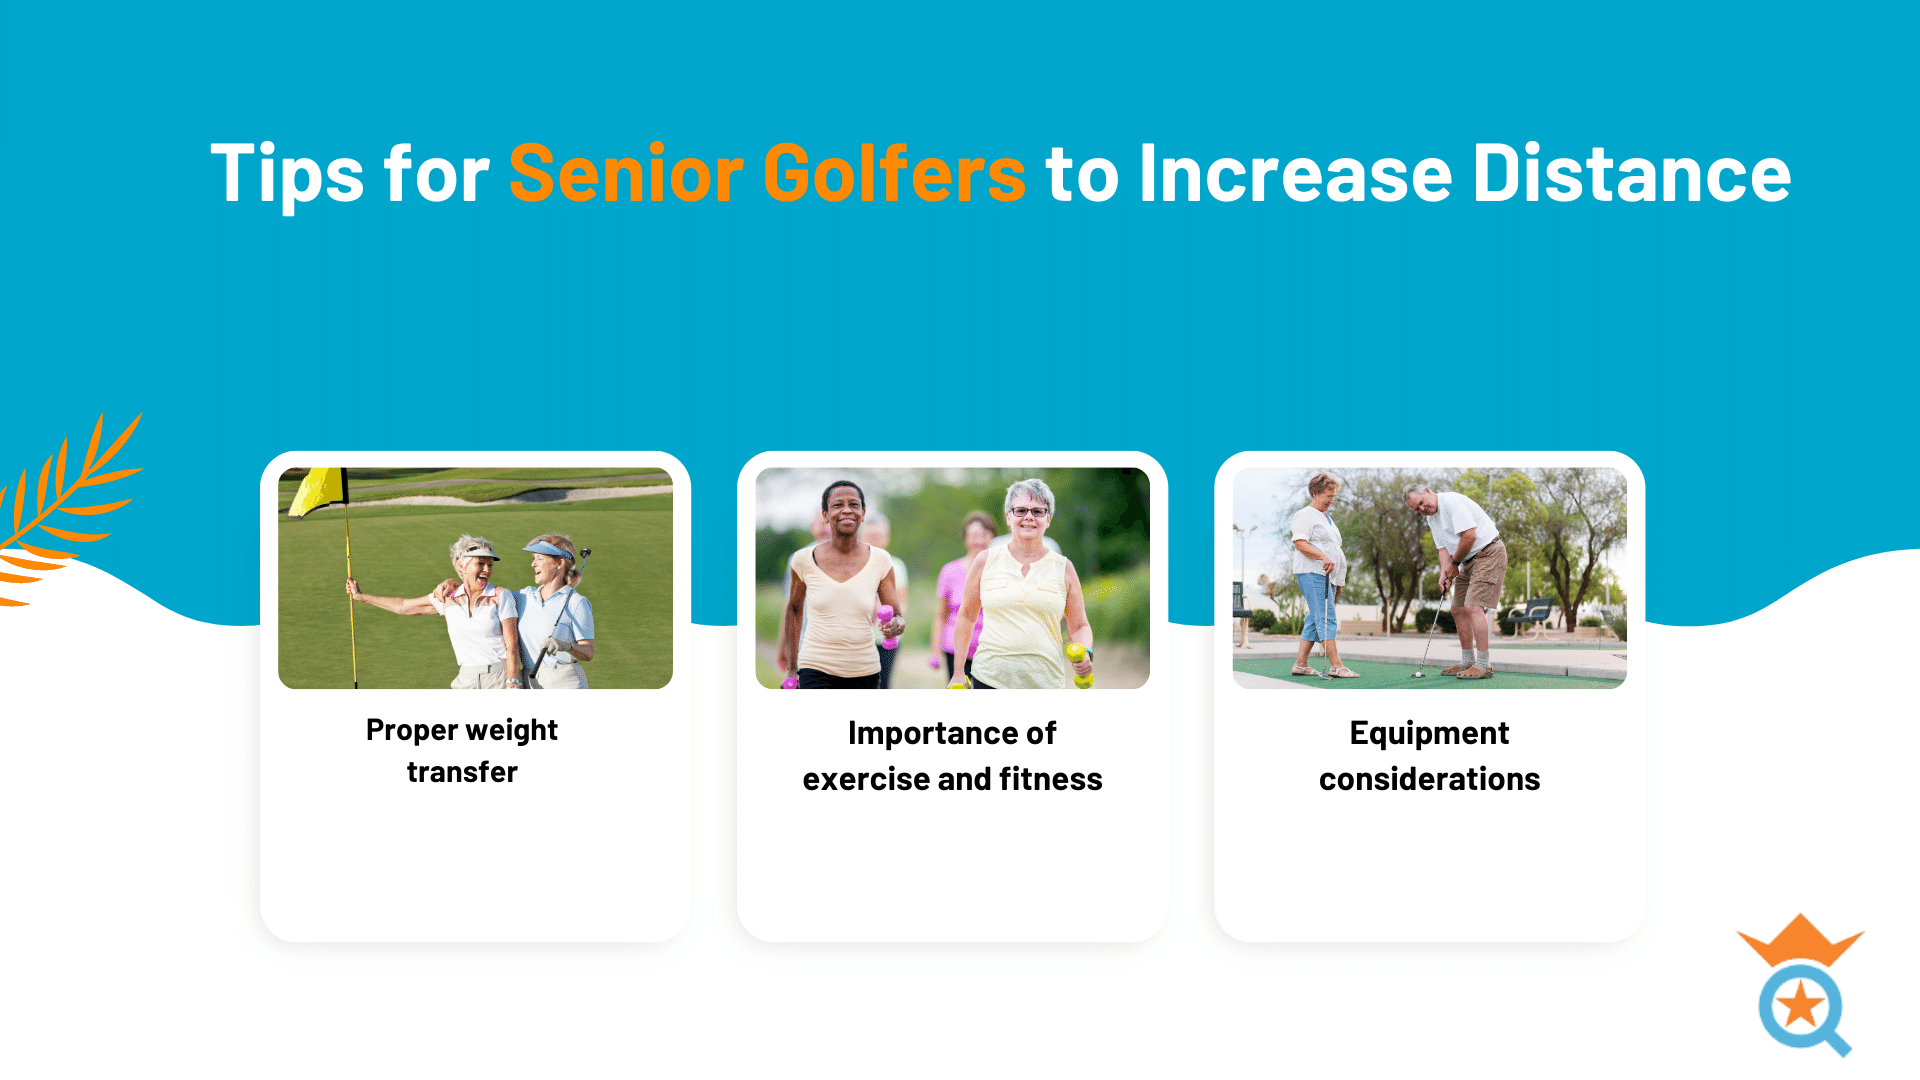 Tips for Senior Golfers to Increase Distance